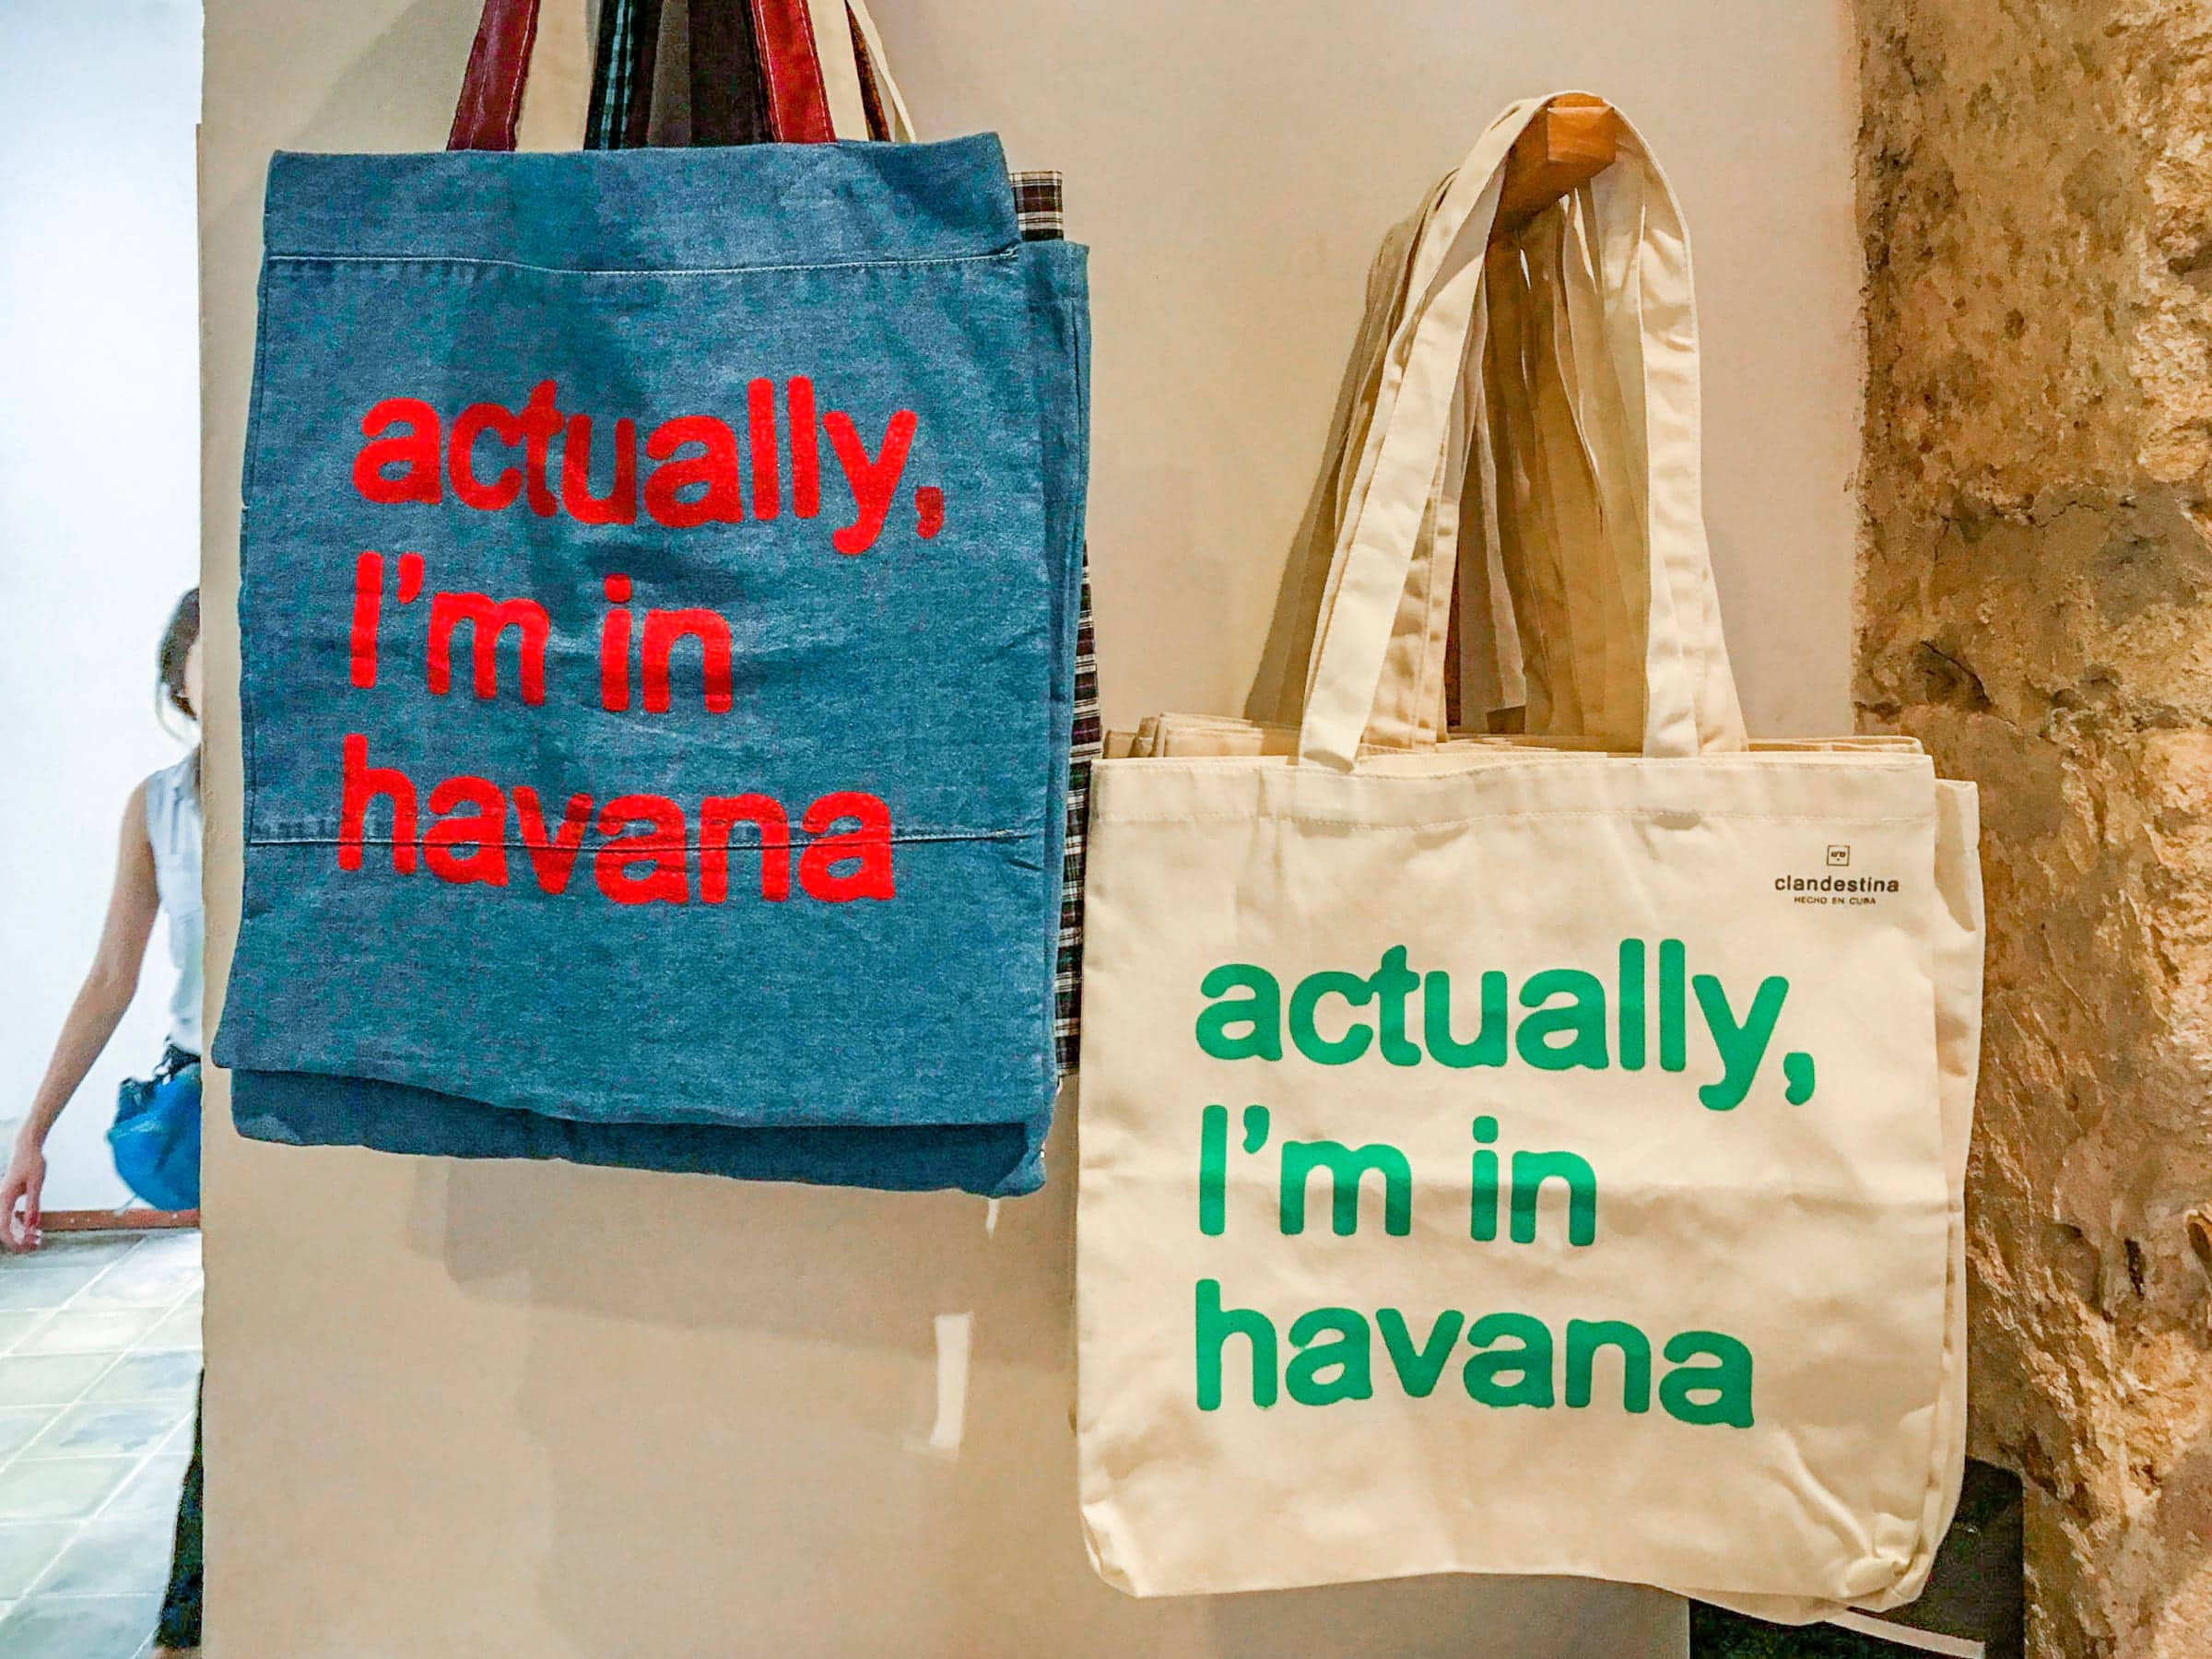 Bags for sale at Clandestina, Cuba by Patrick Bennett